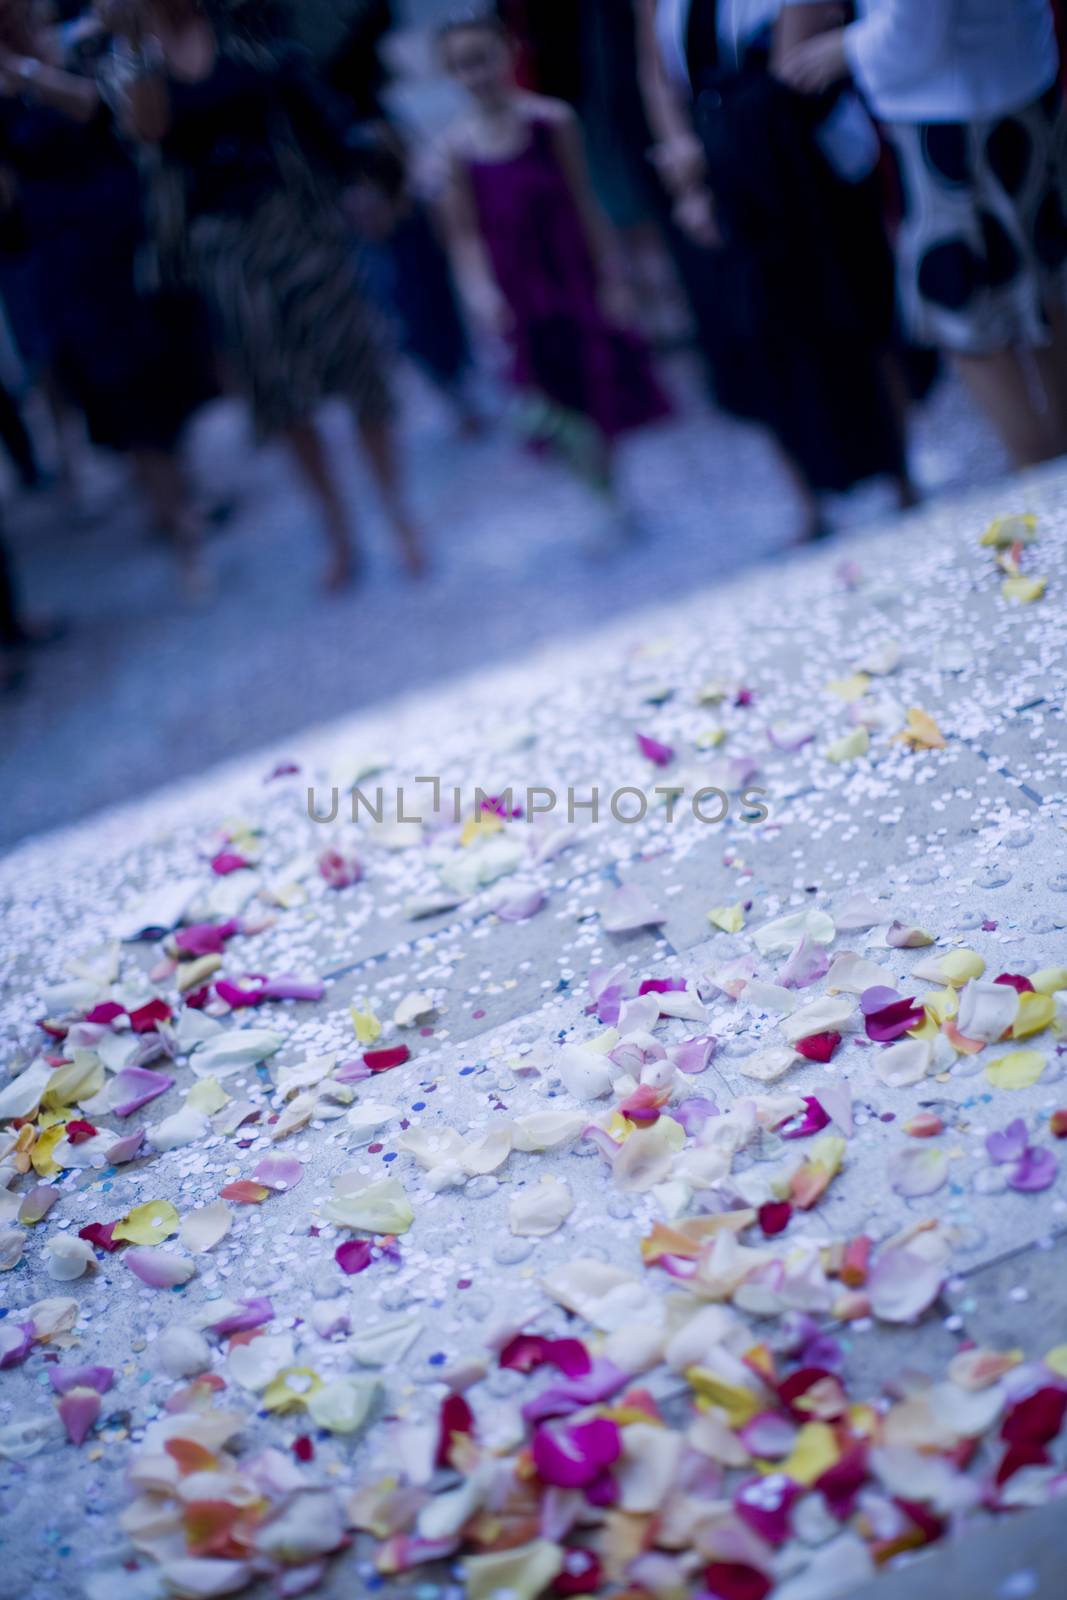 Wedding confetti on ground after marriage ceremony by church by edwardolive